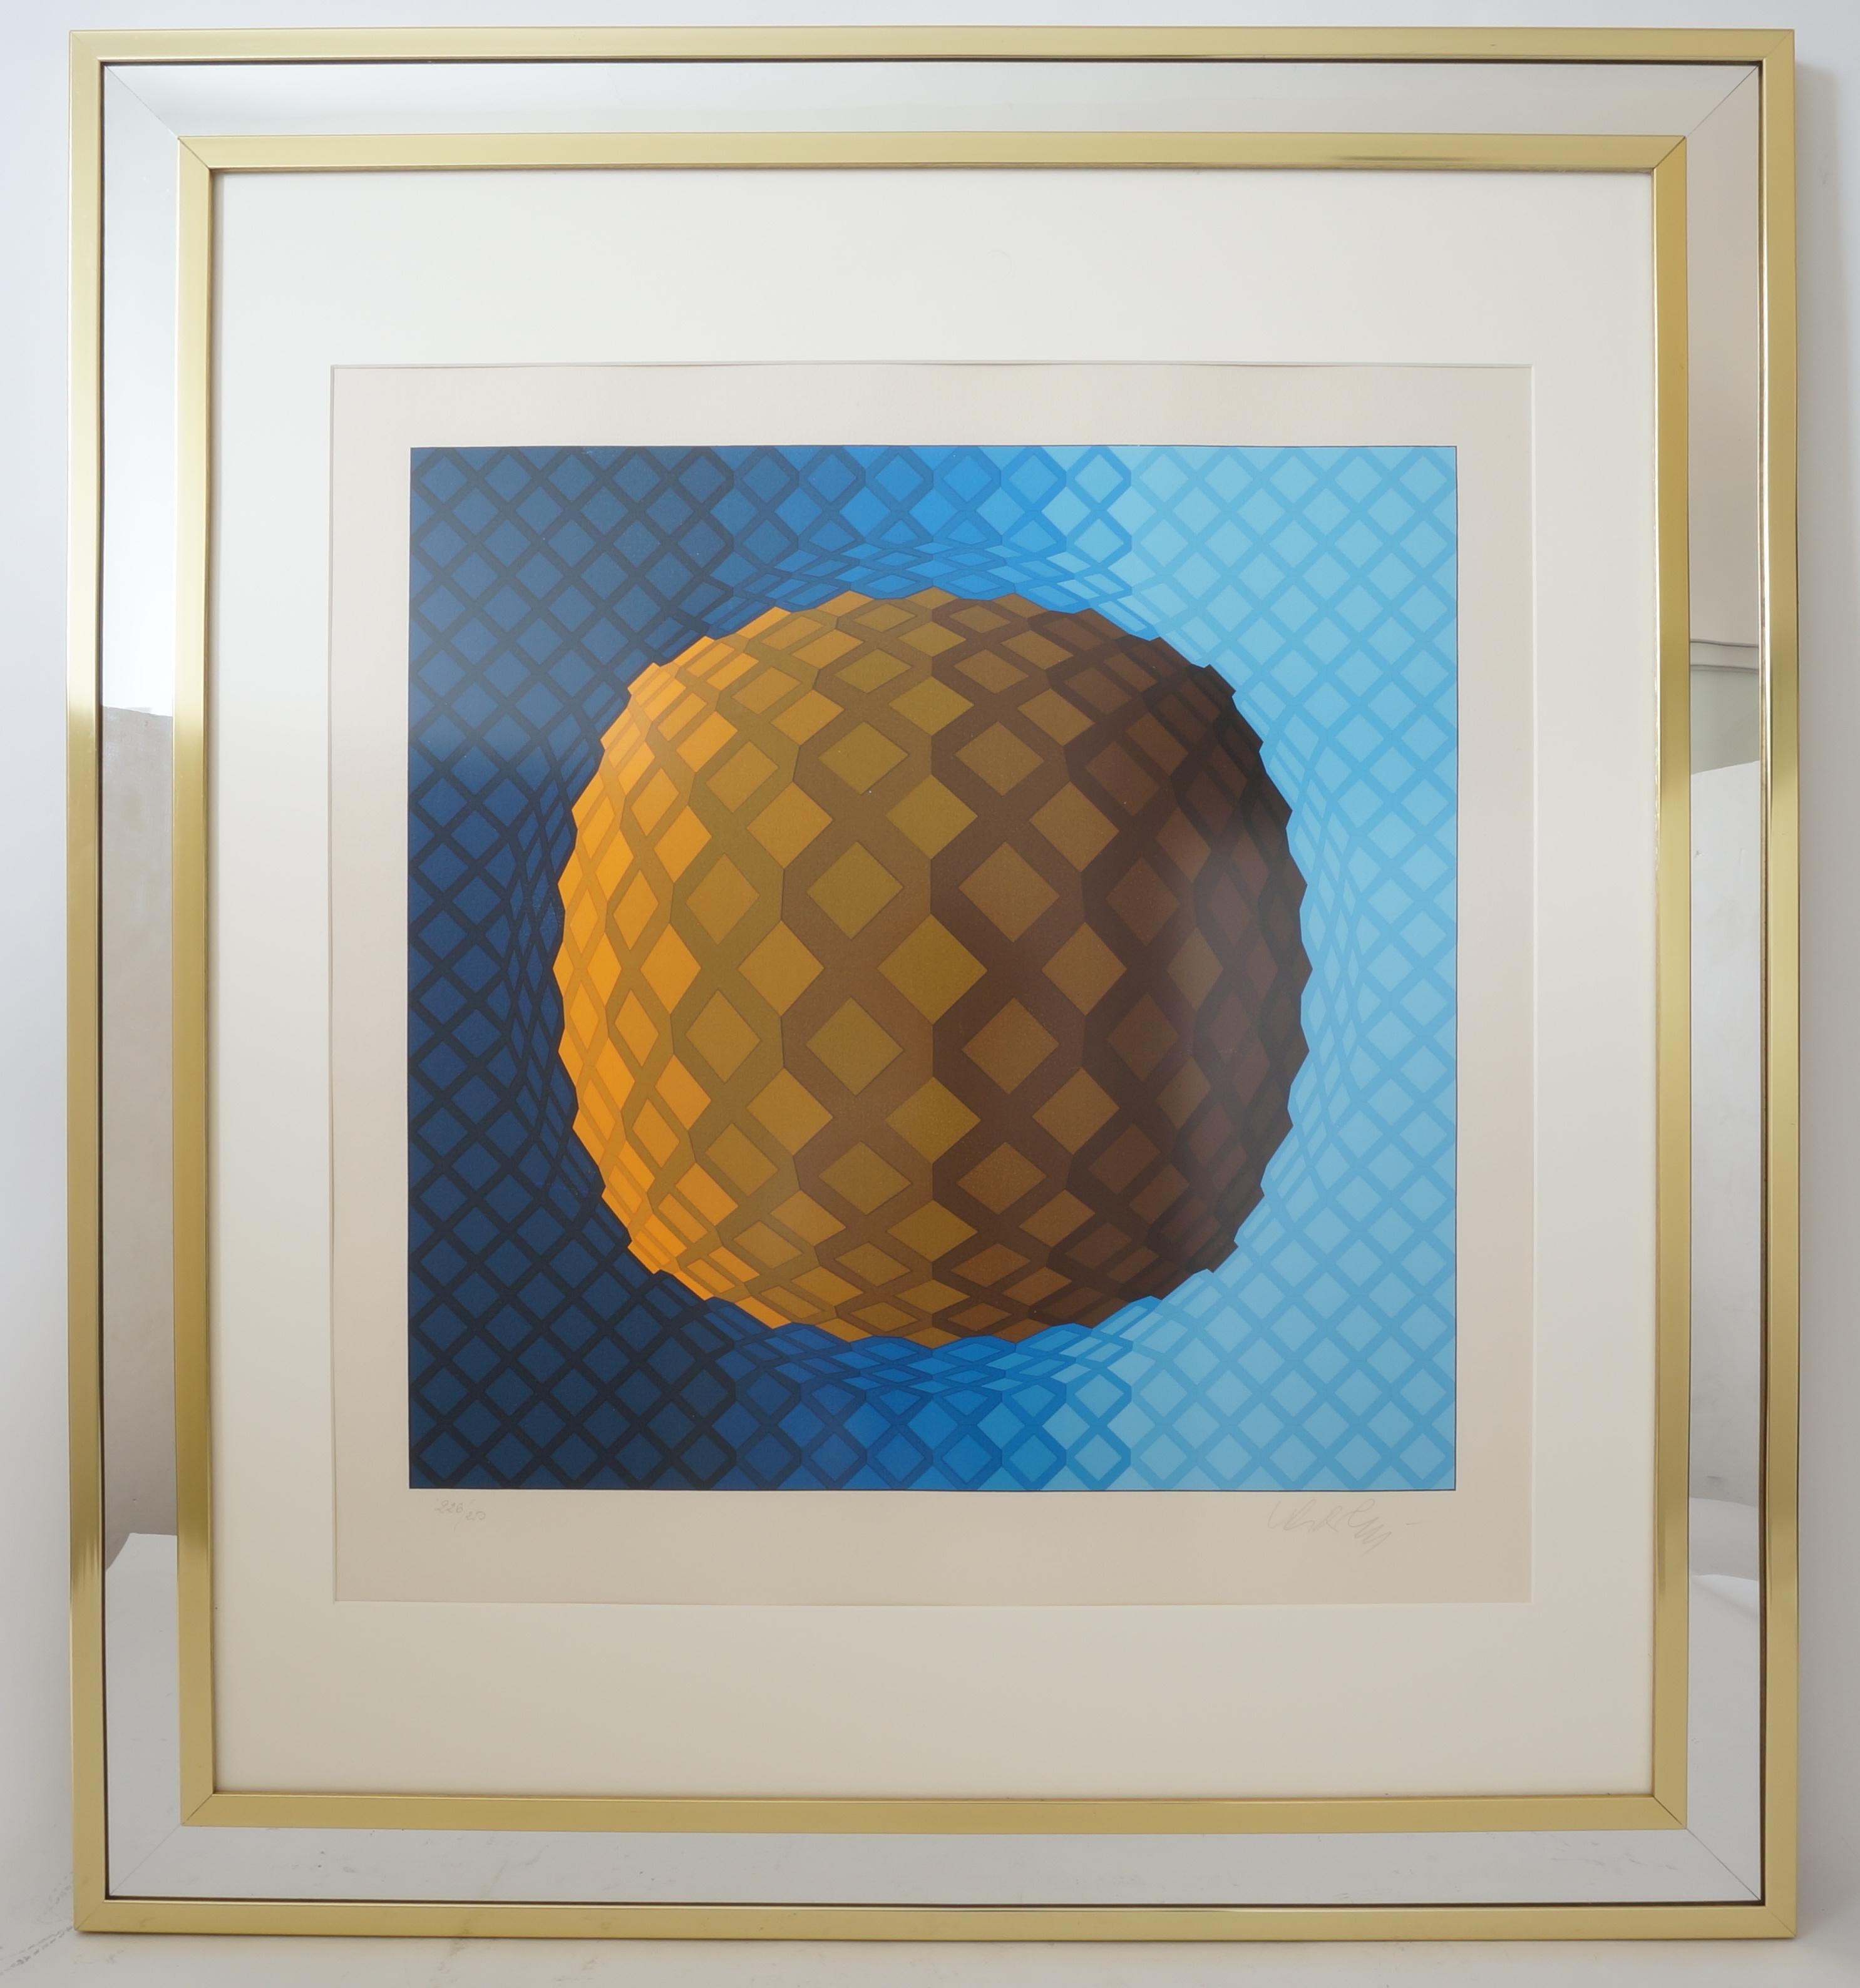 Vintage Vasarely Pencil Signed and Numbered Limited Edition Op Art Original Print Custom Mirror Framed with polished brass from a Palm Beach estate

Frame size is 36 1/4 h x 32 3/4 w x 1